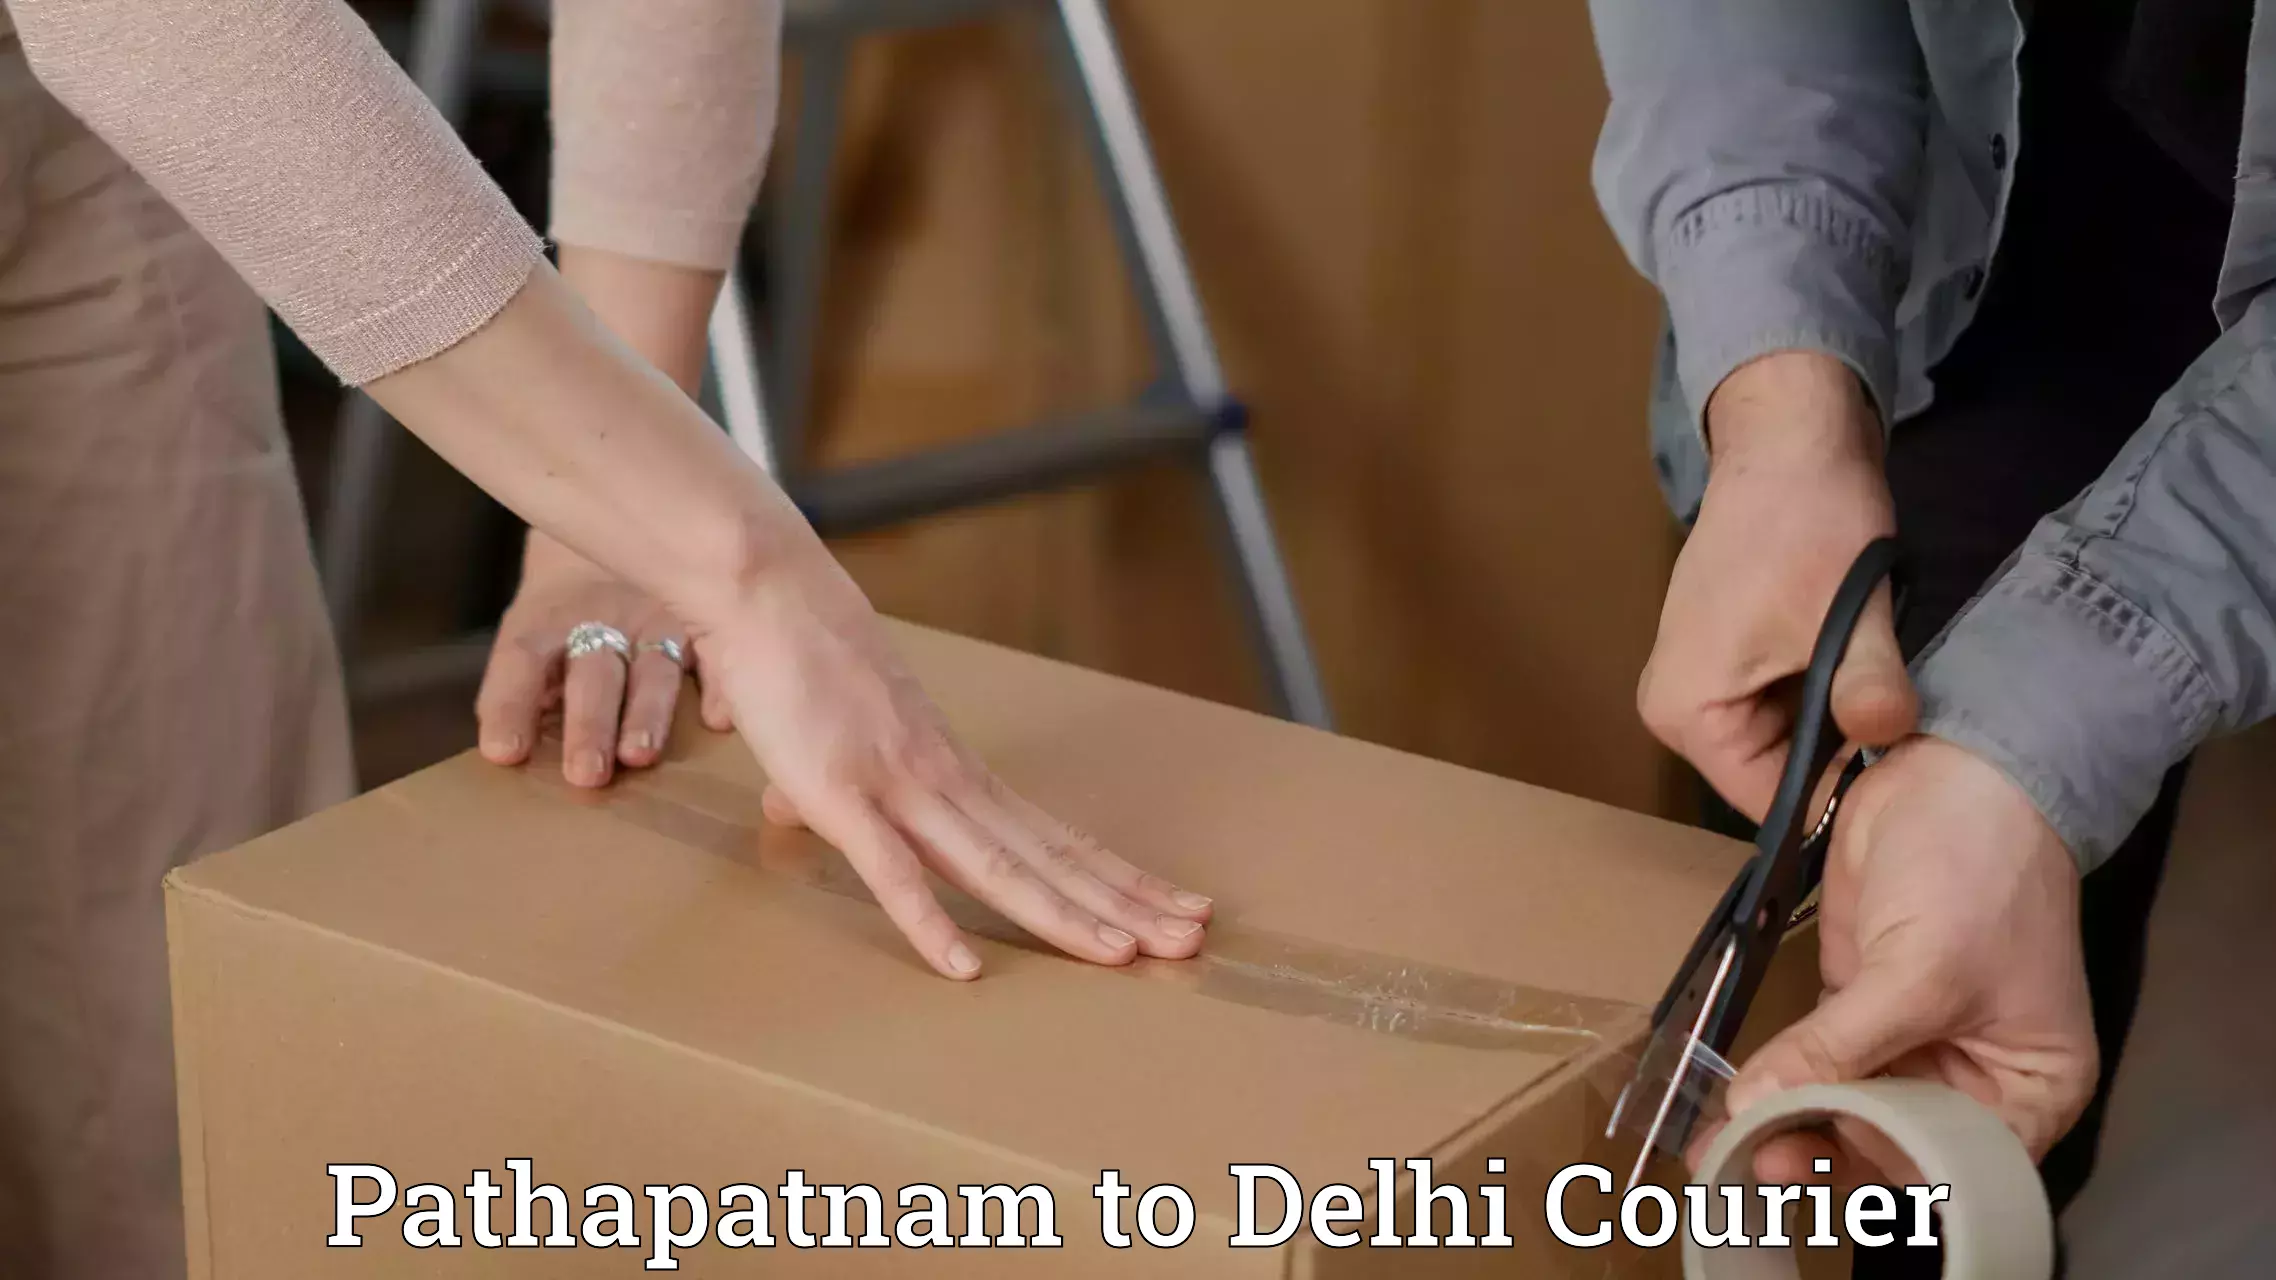 Reliable package handling Pathapatnam to NCR